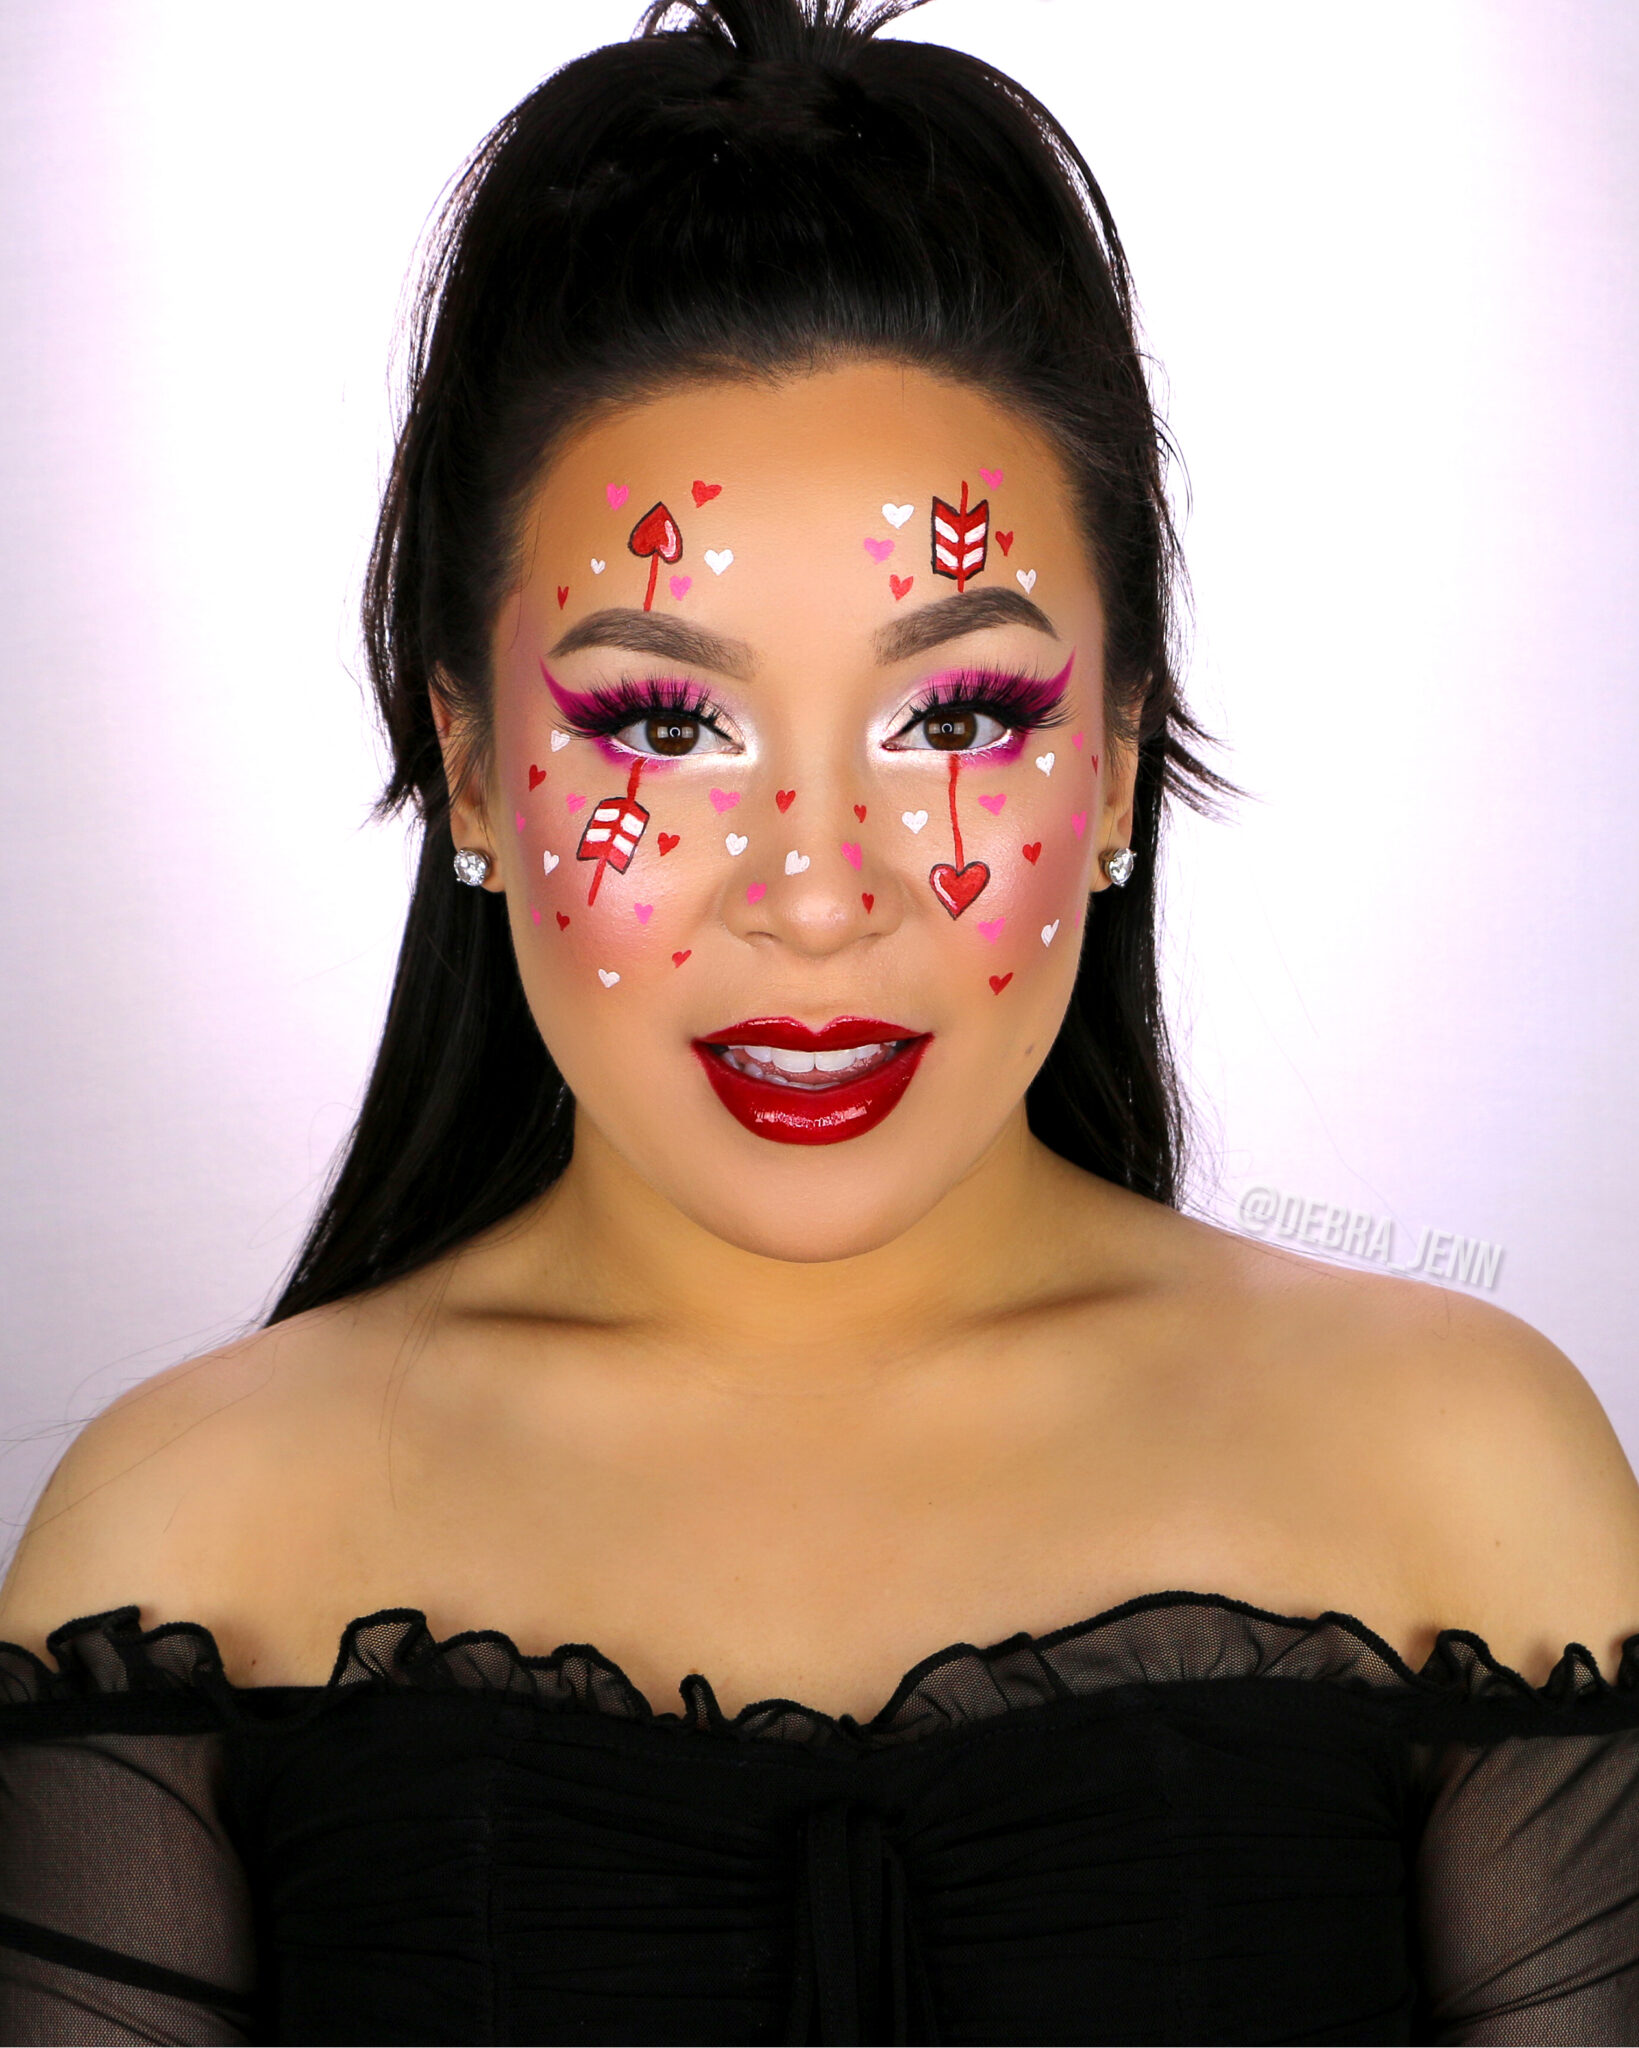 Valentines Day Makeup Looks: Wear Your Heart On Your Face - Debra Jenn